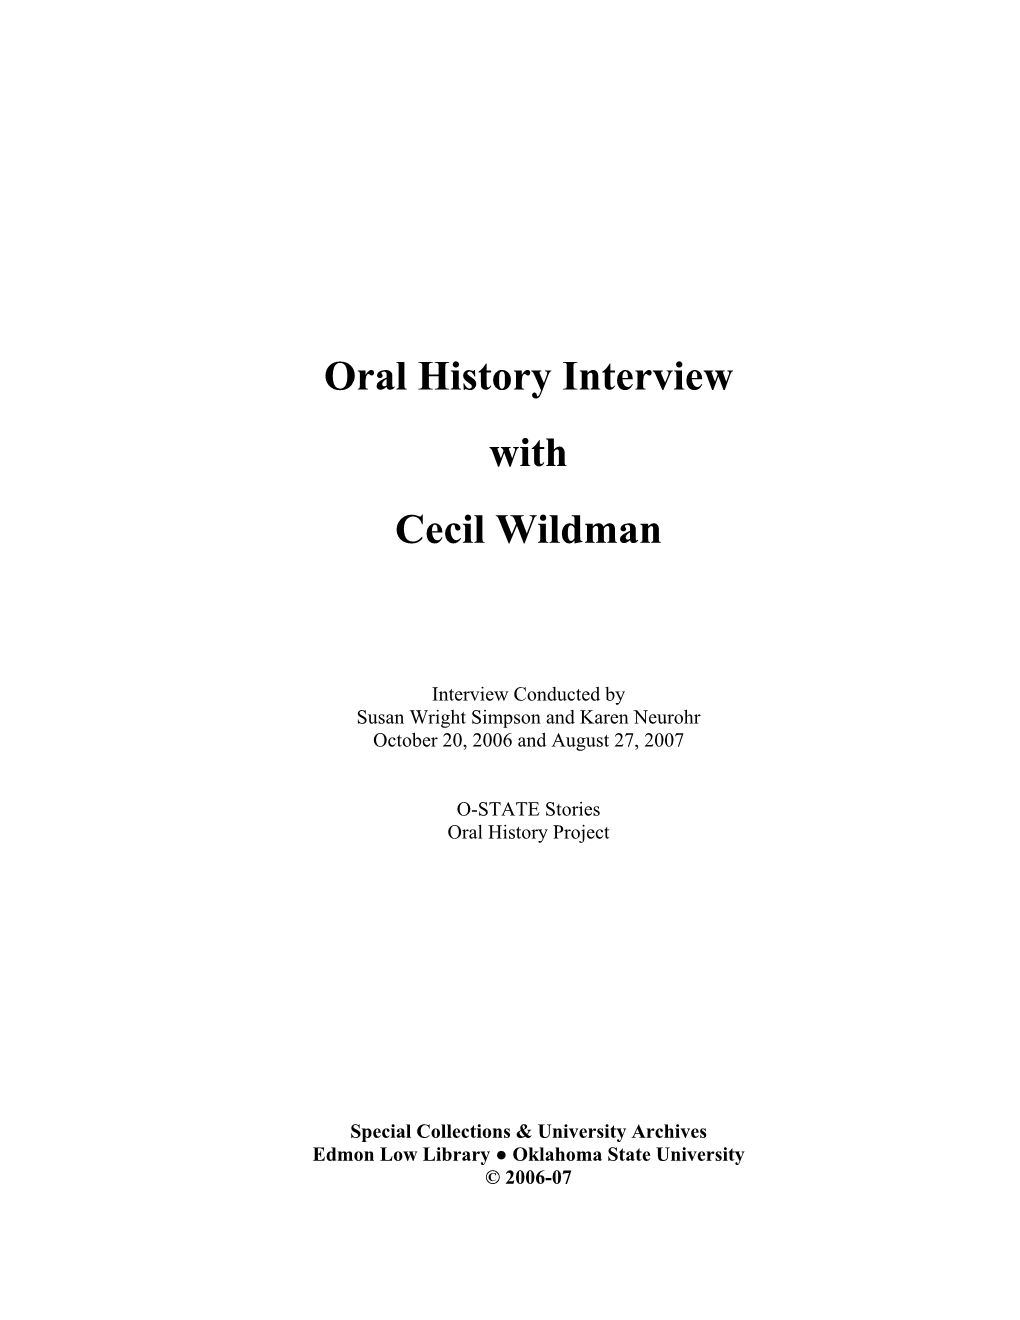 Oral History Interview with Cecil Wildman